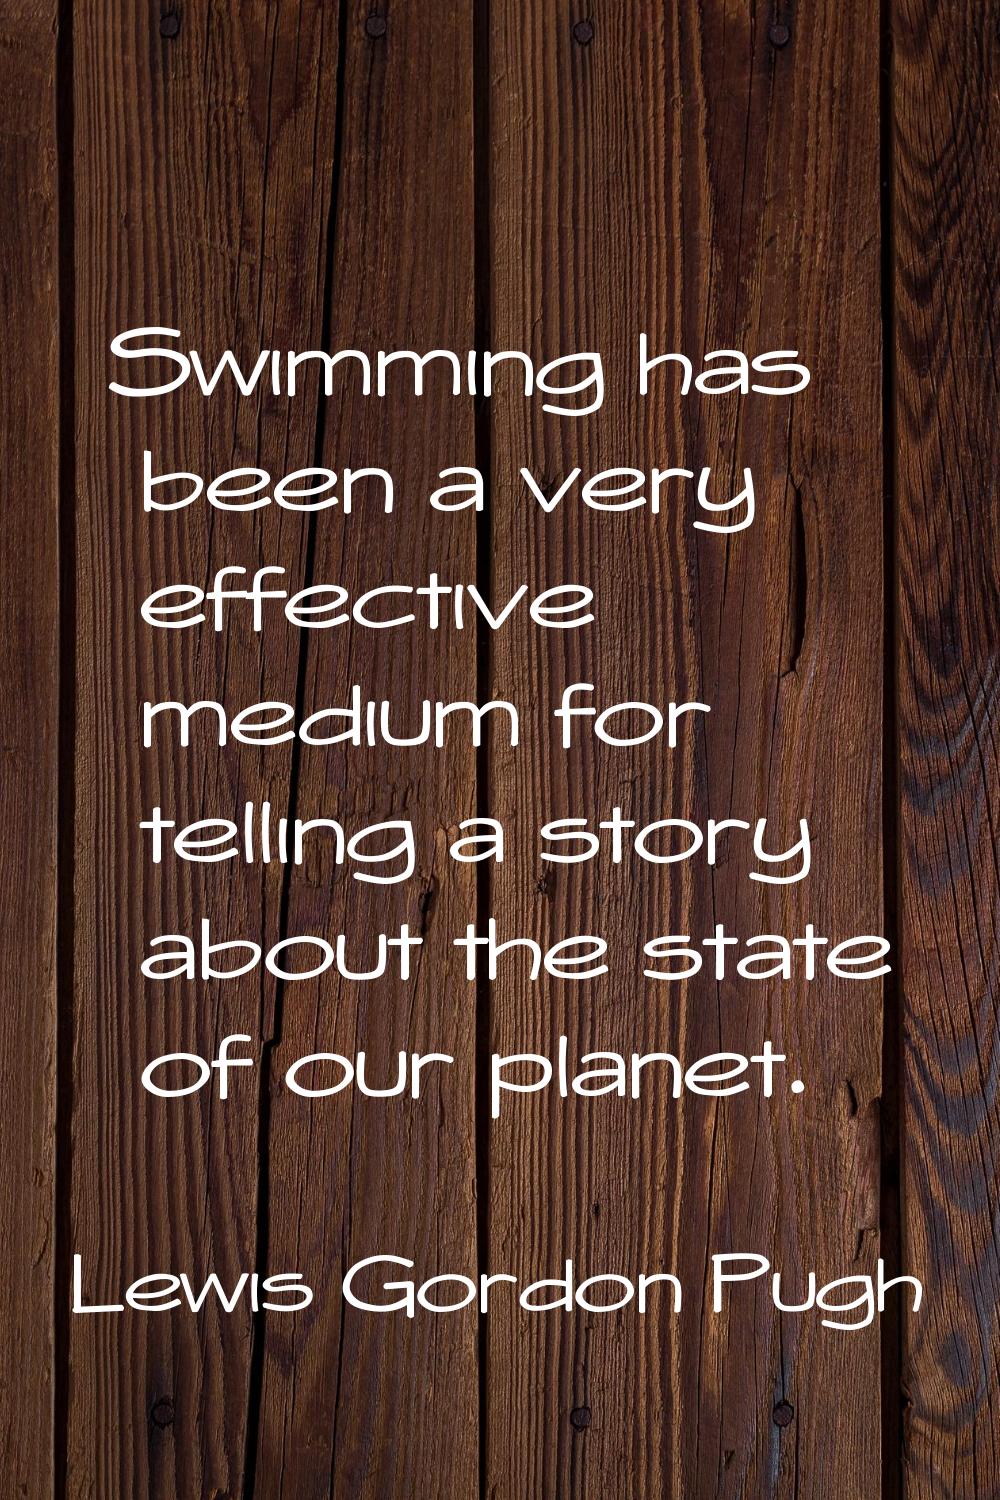 Swimming has been a very effective medium for telling a story about the state of our planet.